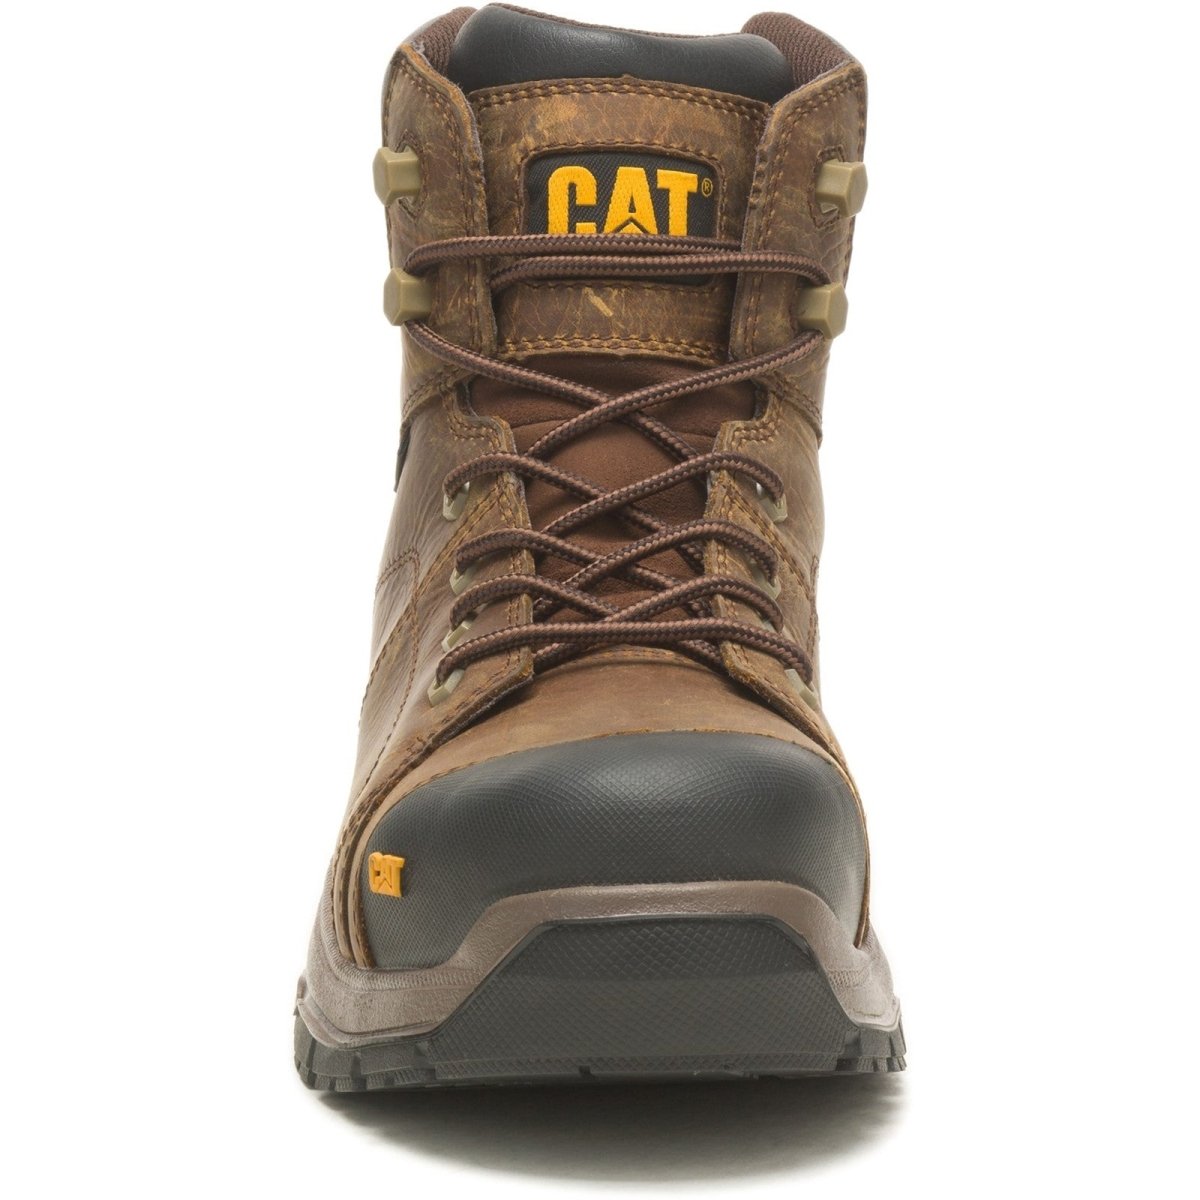 Caterpillar Crossrail 2.0 S3 Mens Composite Safety Boot - Shoe Store Direct